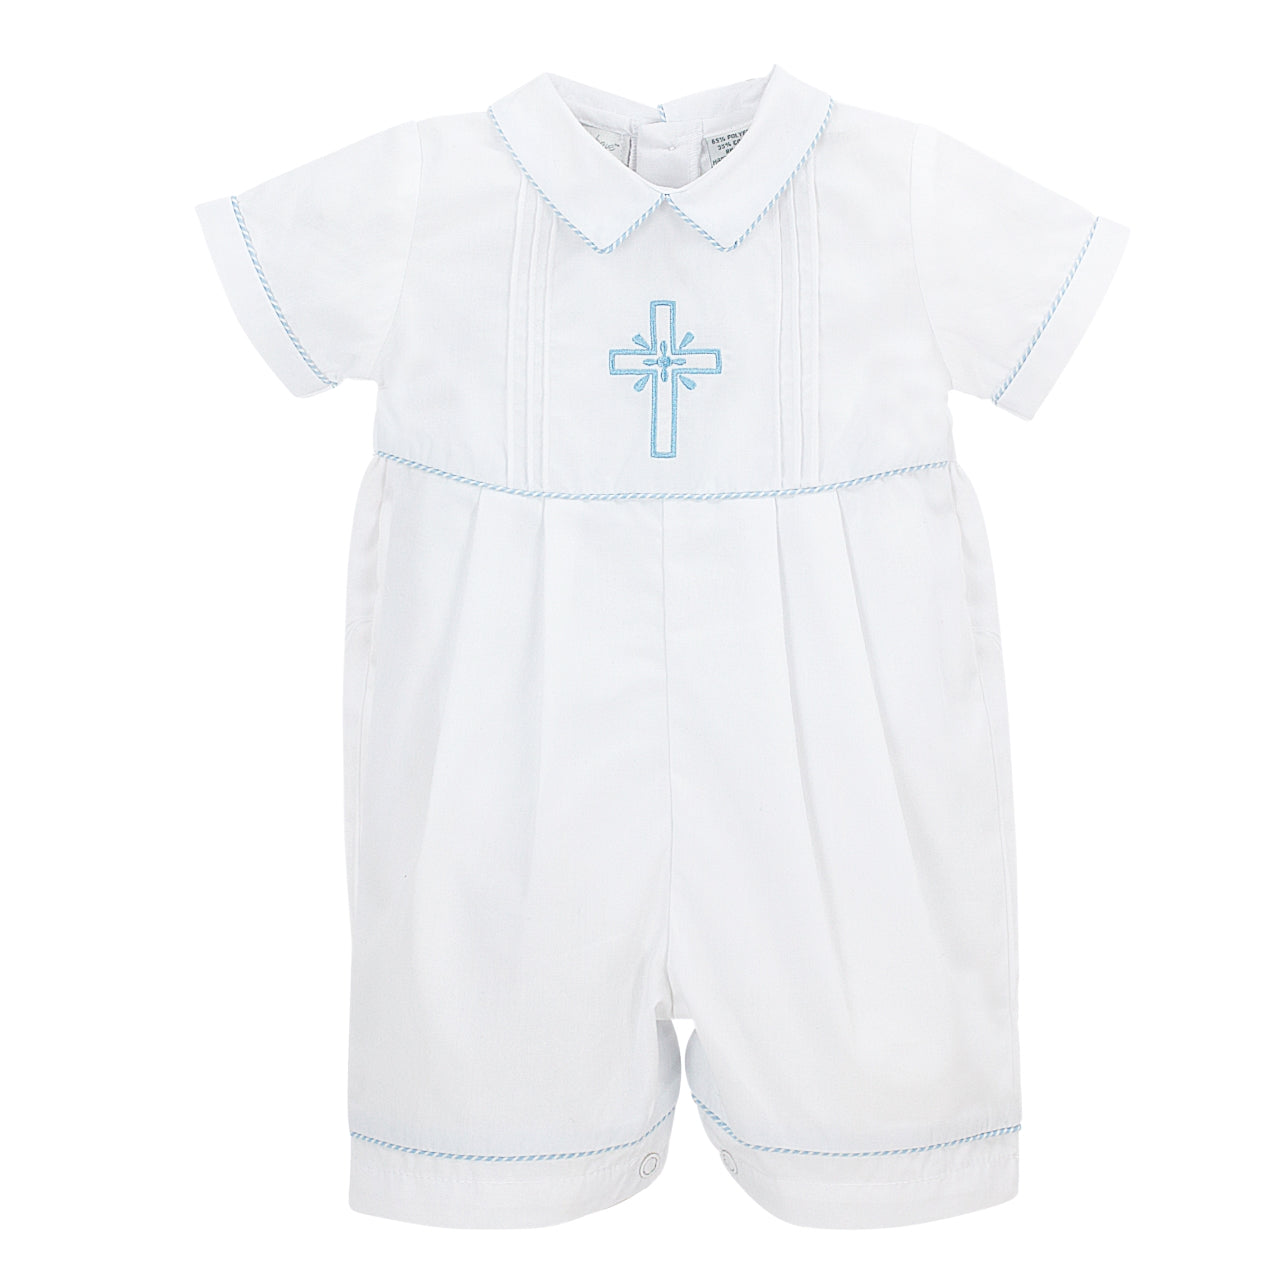 Wholesale Baby Boy Christening Outfit Smocked Cross Shortall 5 - Imagewear